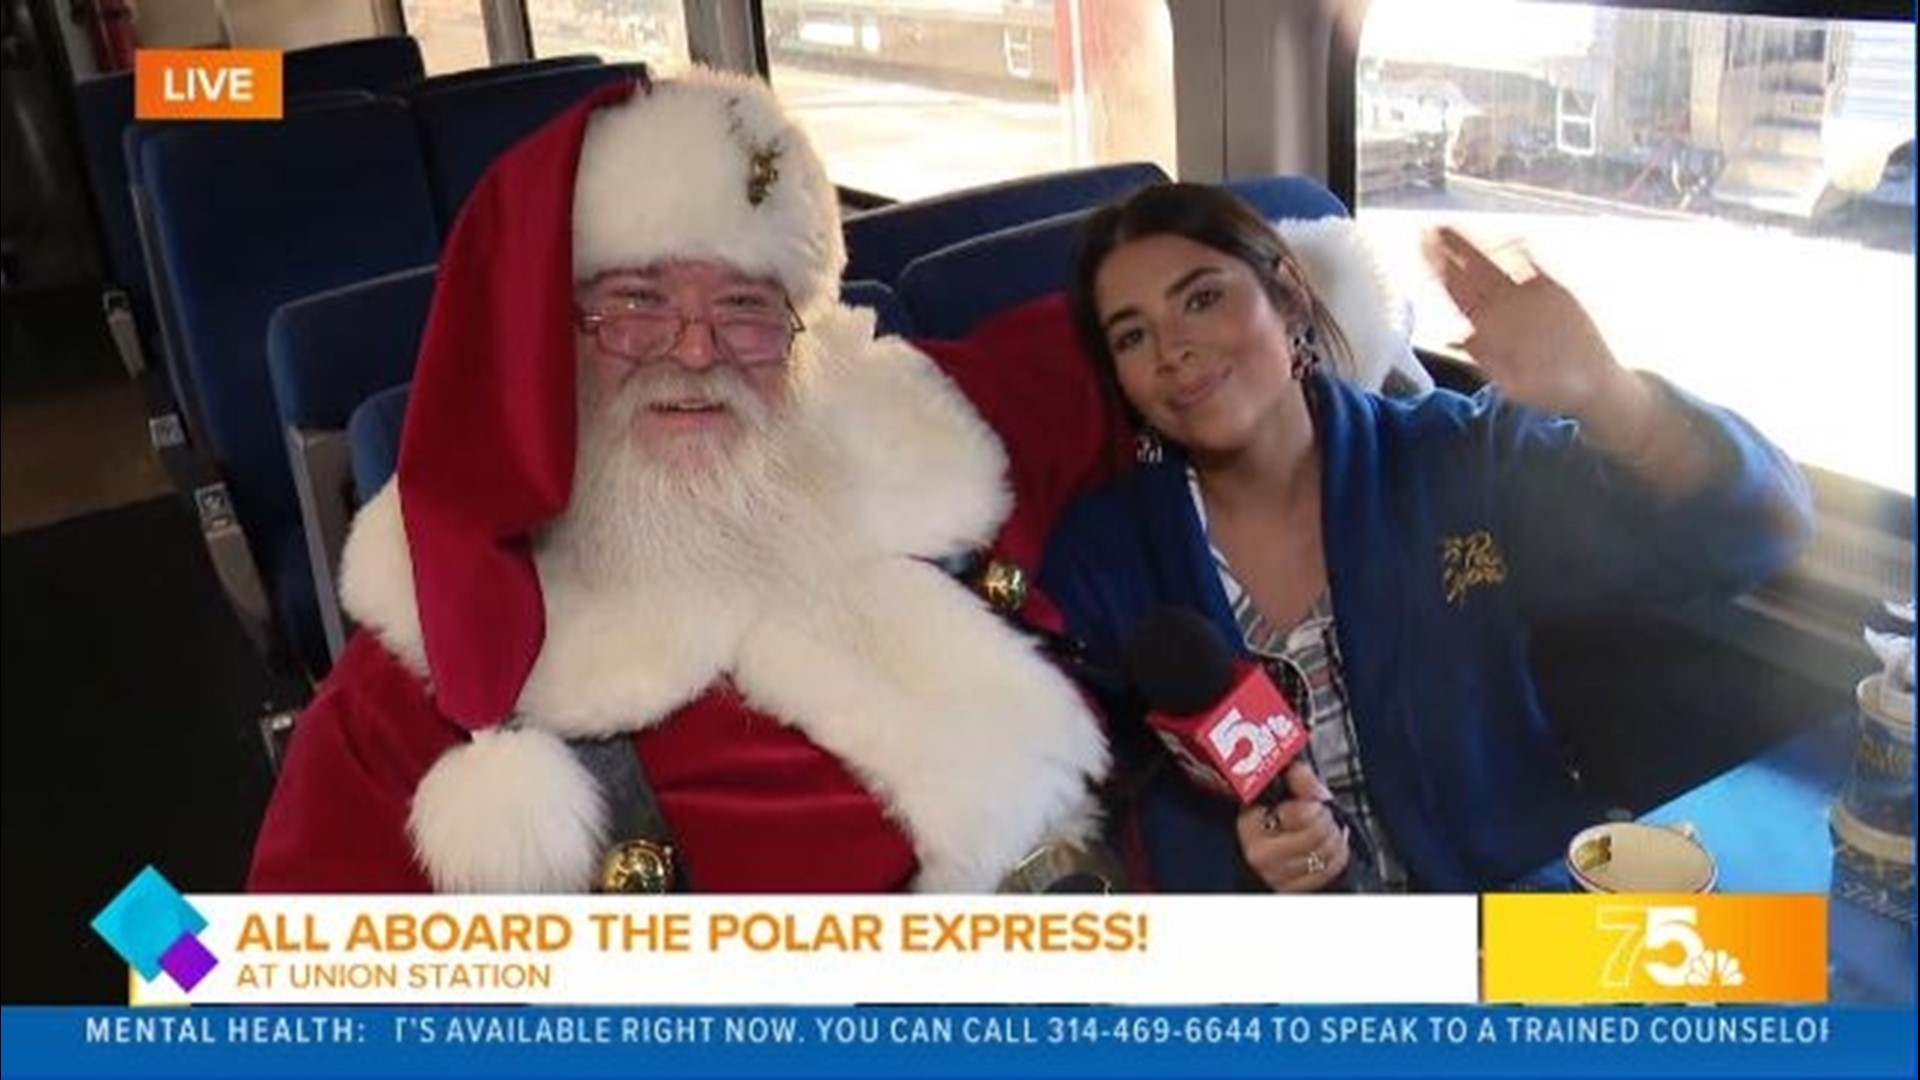 Get the full Polar Express experience from Union Station straight to The North Pole. You'll be greeted by dancing chefs, a cheerful conductor and Mr. Claus himself.